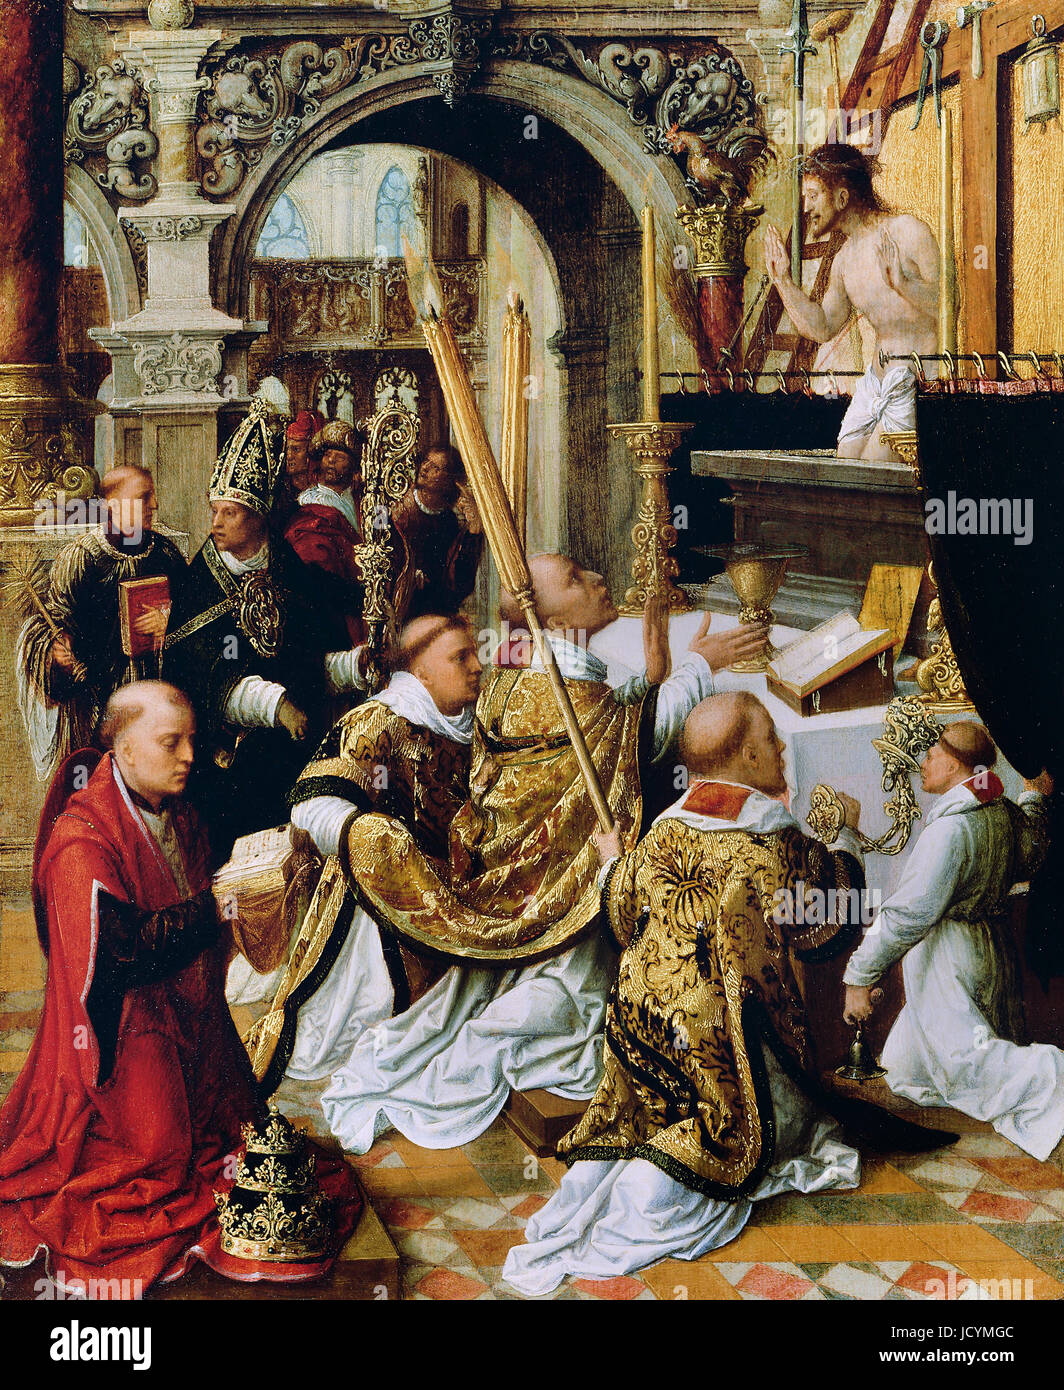 0Adriaen Ysenbrandt, The Mass of Saint Gregory the Great. Circa 1510-1550. Oil on panel. Getty Center, Los Angeles, USA. Stock Photo